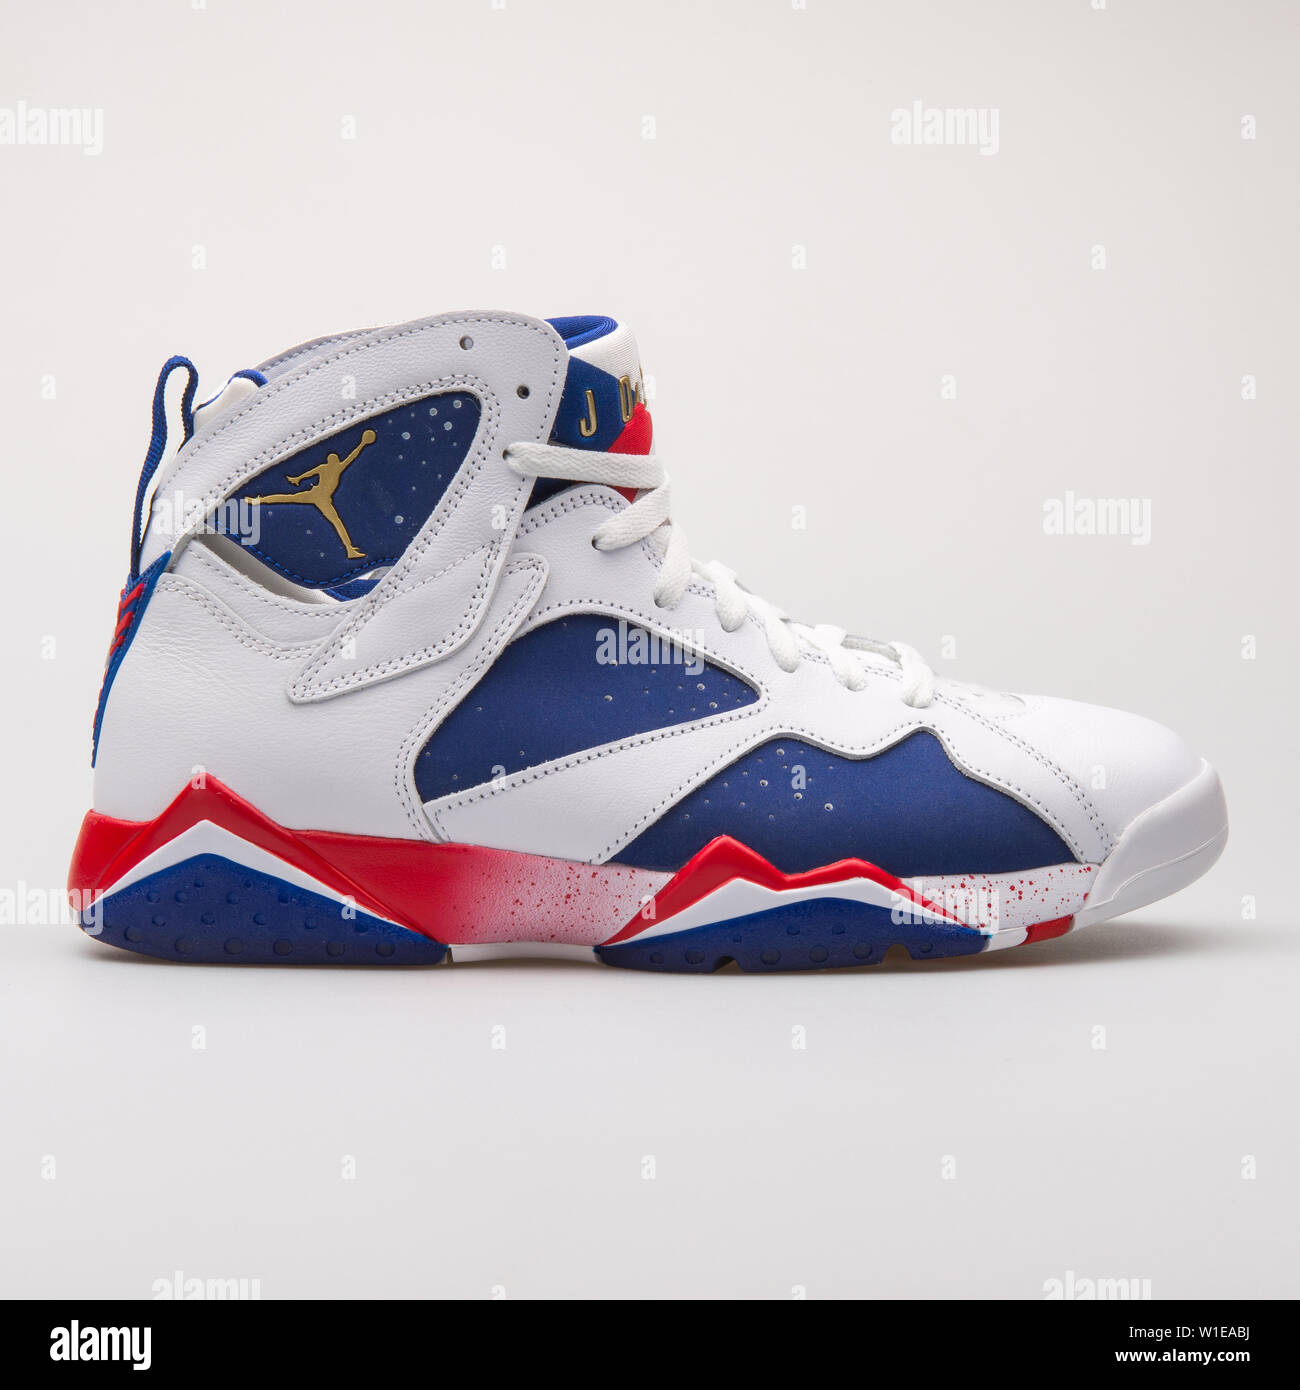 VIENNA, AUSTRIA - JUNE 14, 2017: Nike Air Jordan 7 Retro white, blue and  red sneaker isolated on grey background Stock Photo - Alamy